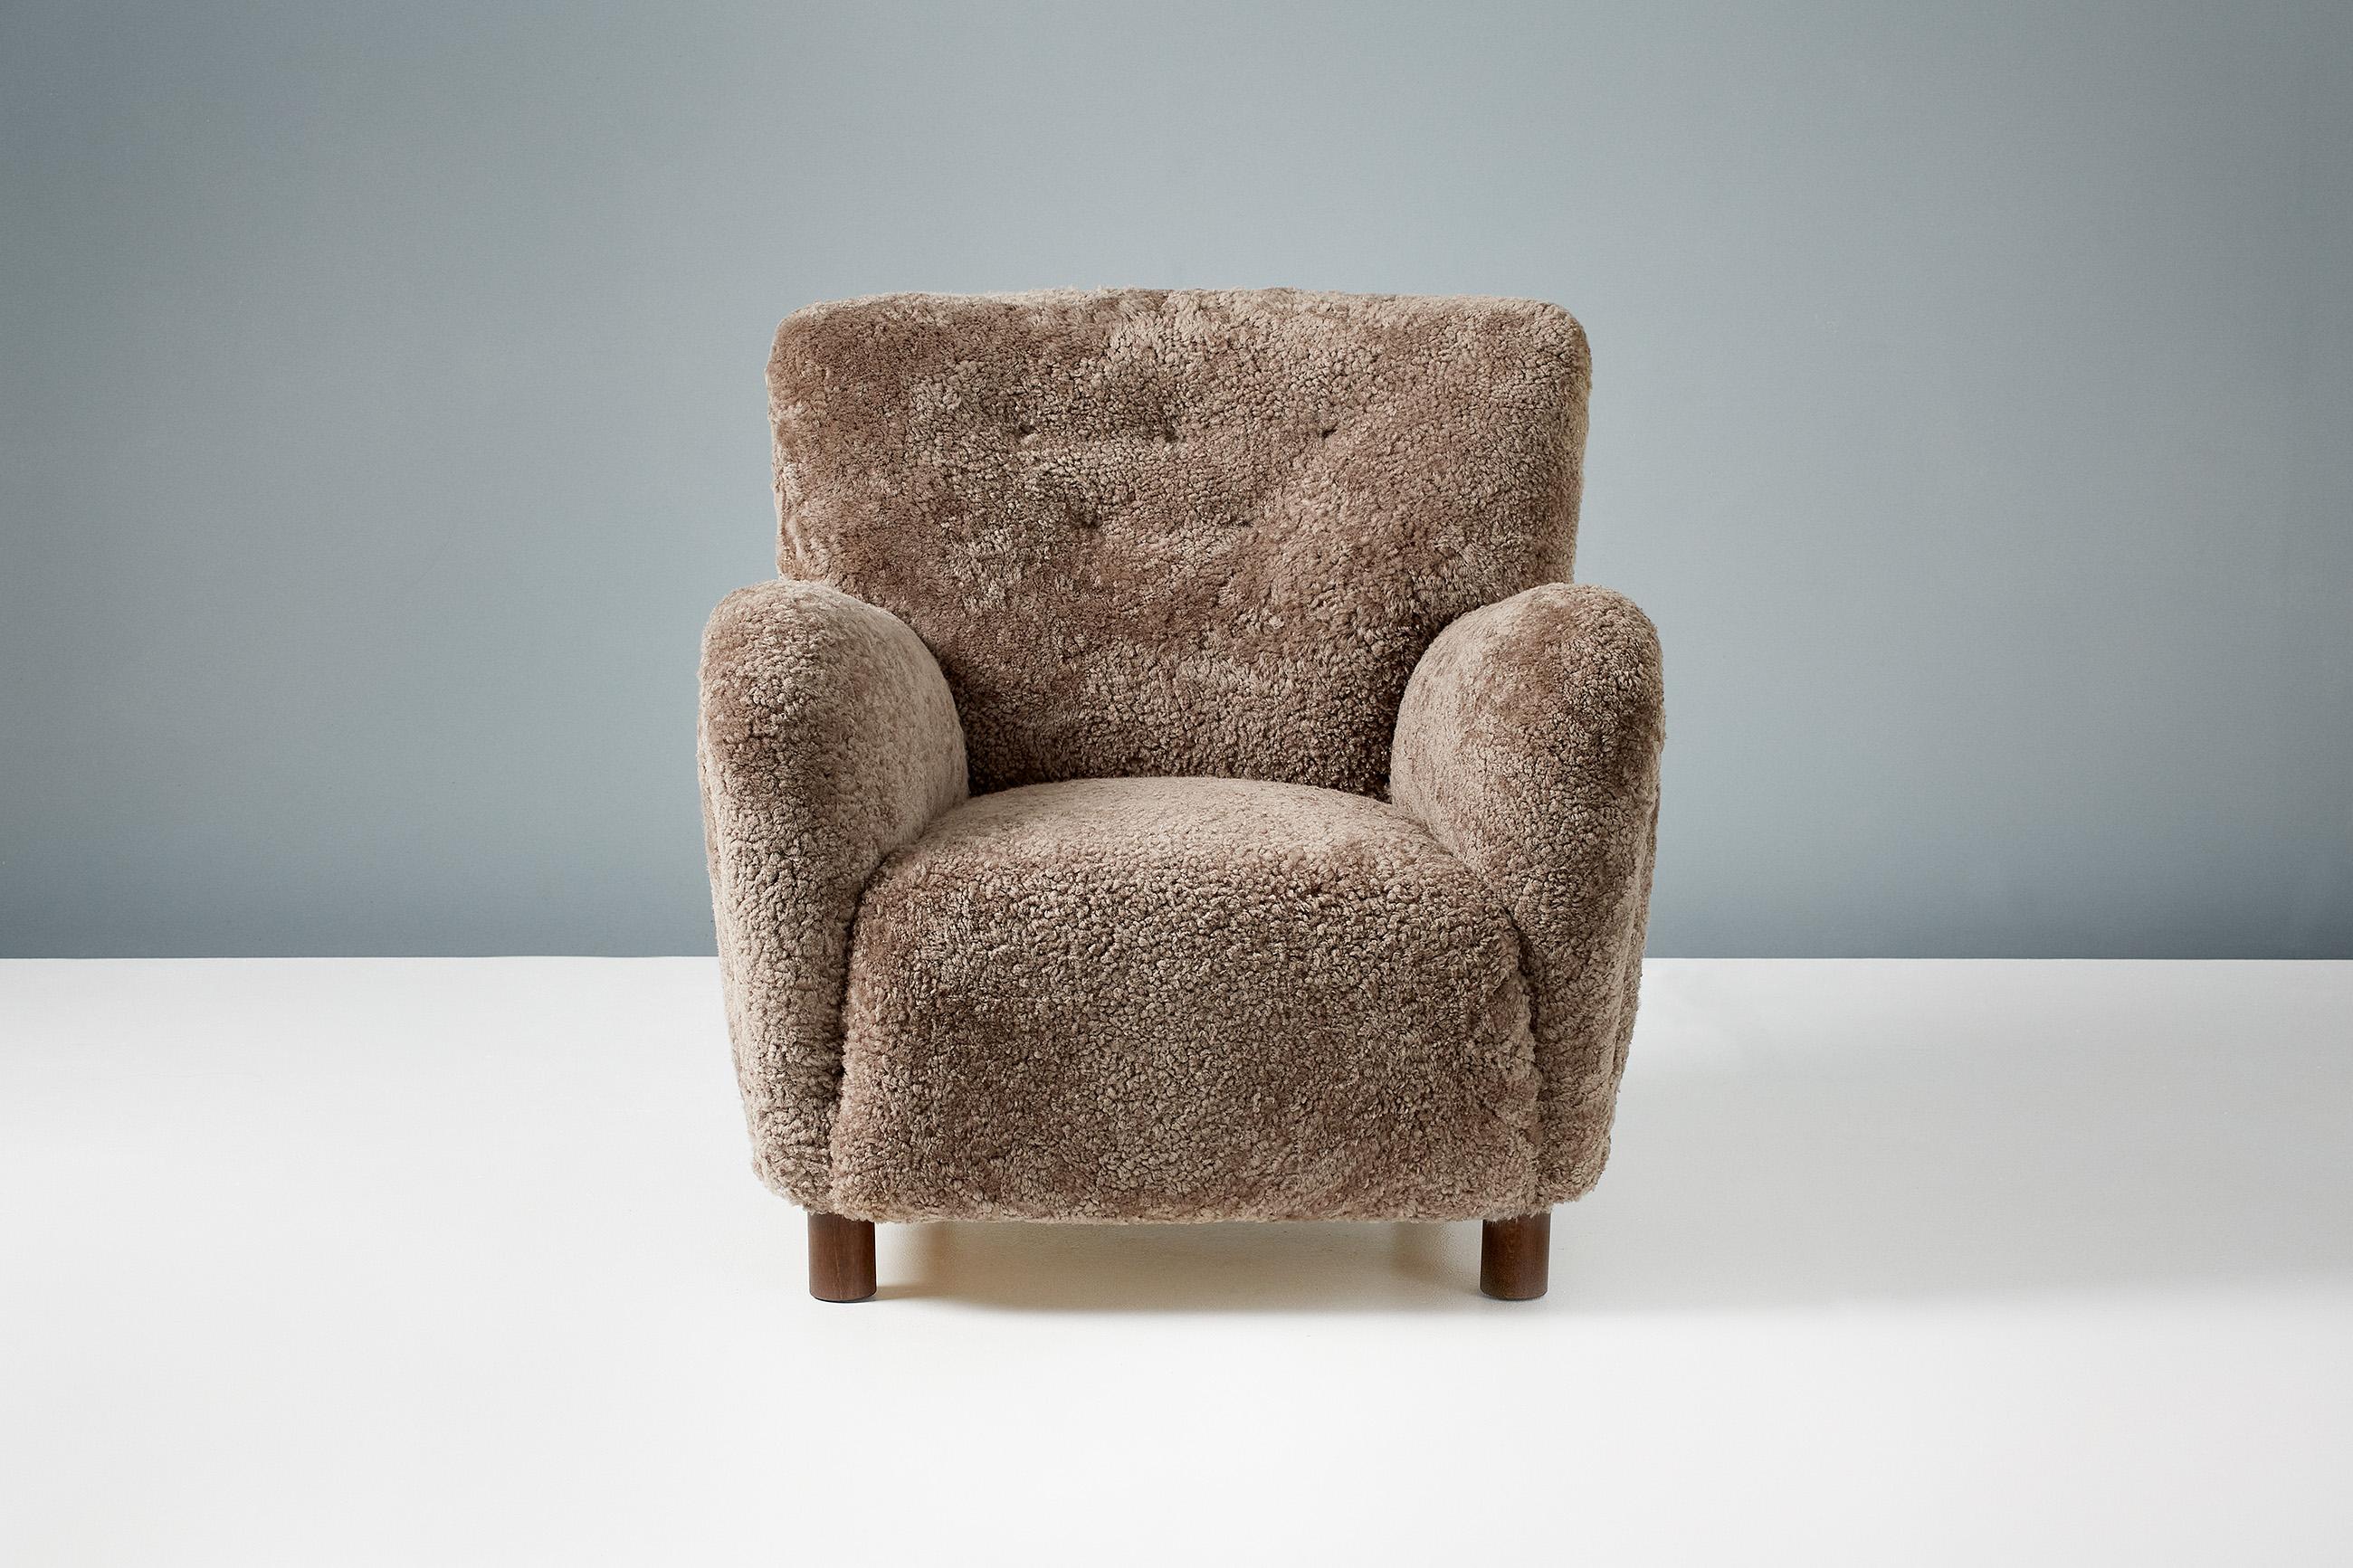 Dagmar design

Model 54 lounge chair

A pair of custom made lounge chairs developed and hand-made at our workshops in London using the highest quality materials. The 54 chair is available to order in a range of different shearling colours and